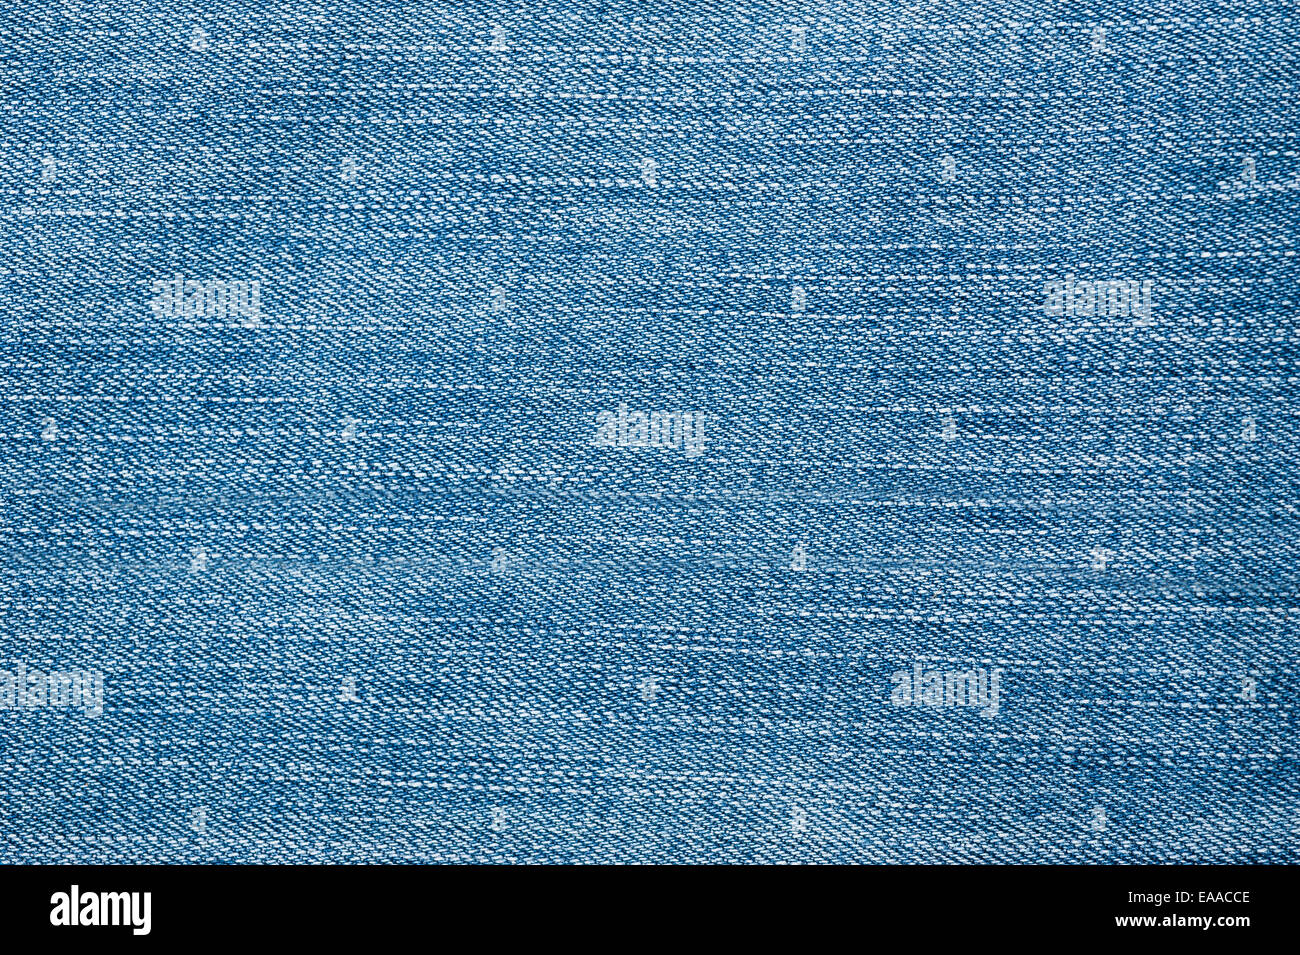 Texture from a pair of denim jeans Stock Photo